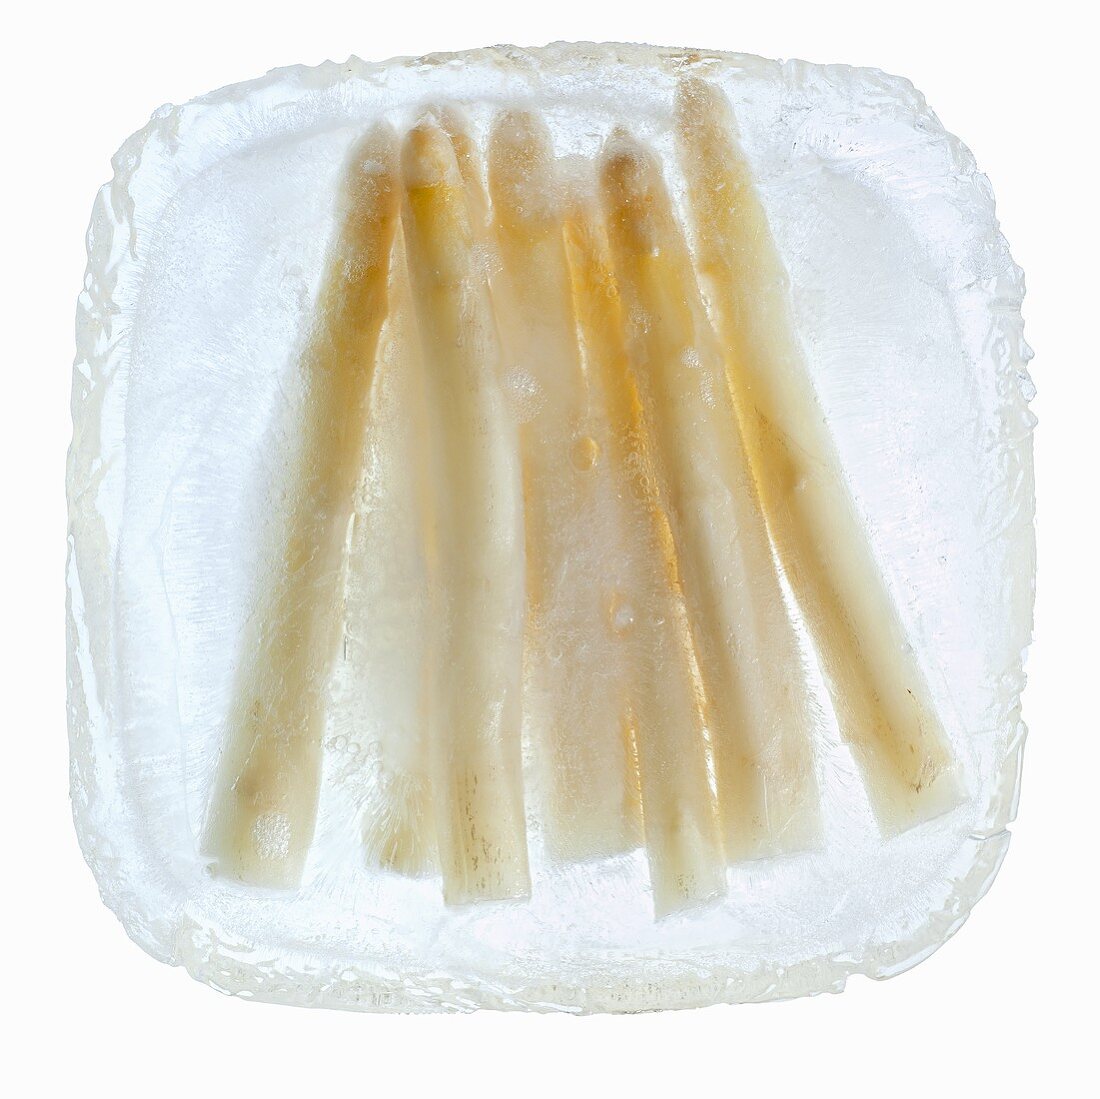 White asparagus in a block of ice